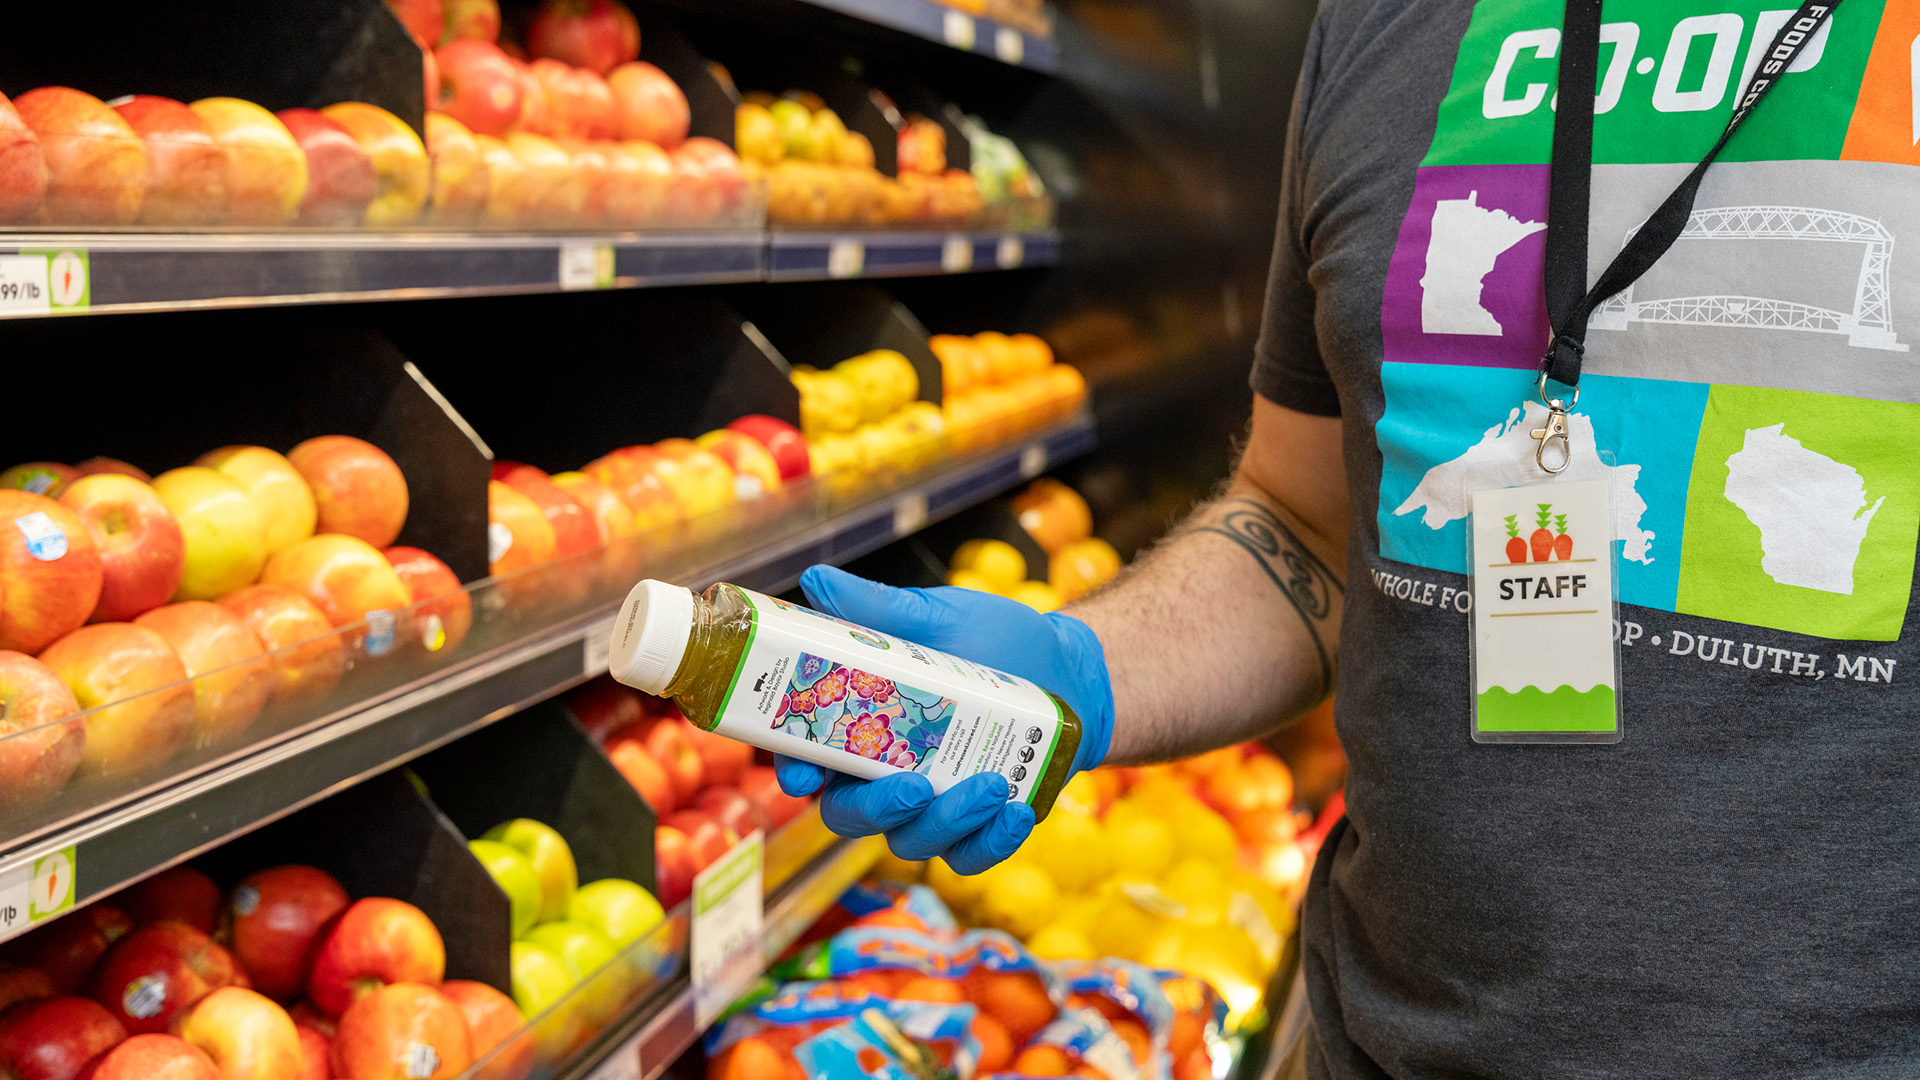 A grocery store employee wearing a "Staff" badge and blue gloves holds a bottle of green juice in front of a display of apples and bell peppers. The employee's T-shirt features the word "CO-OP" and an illustration of Minnesota, highlighting the opportunities for Whole Foods Coop jobs.